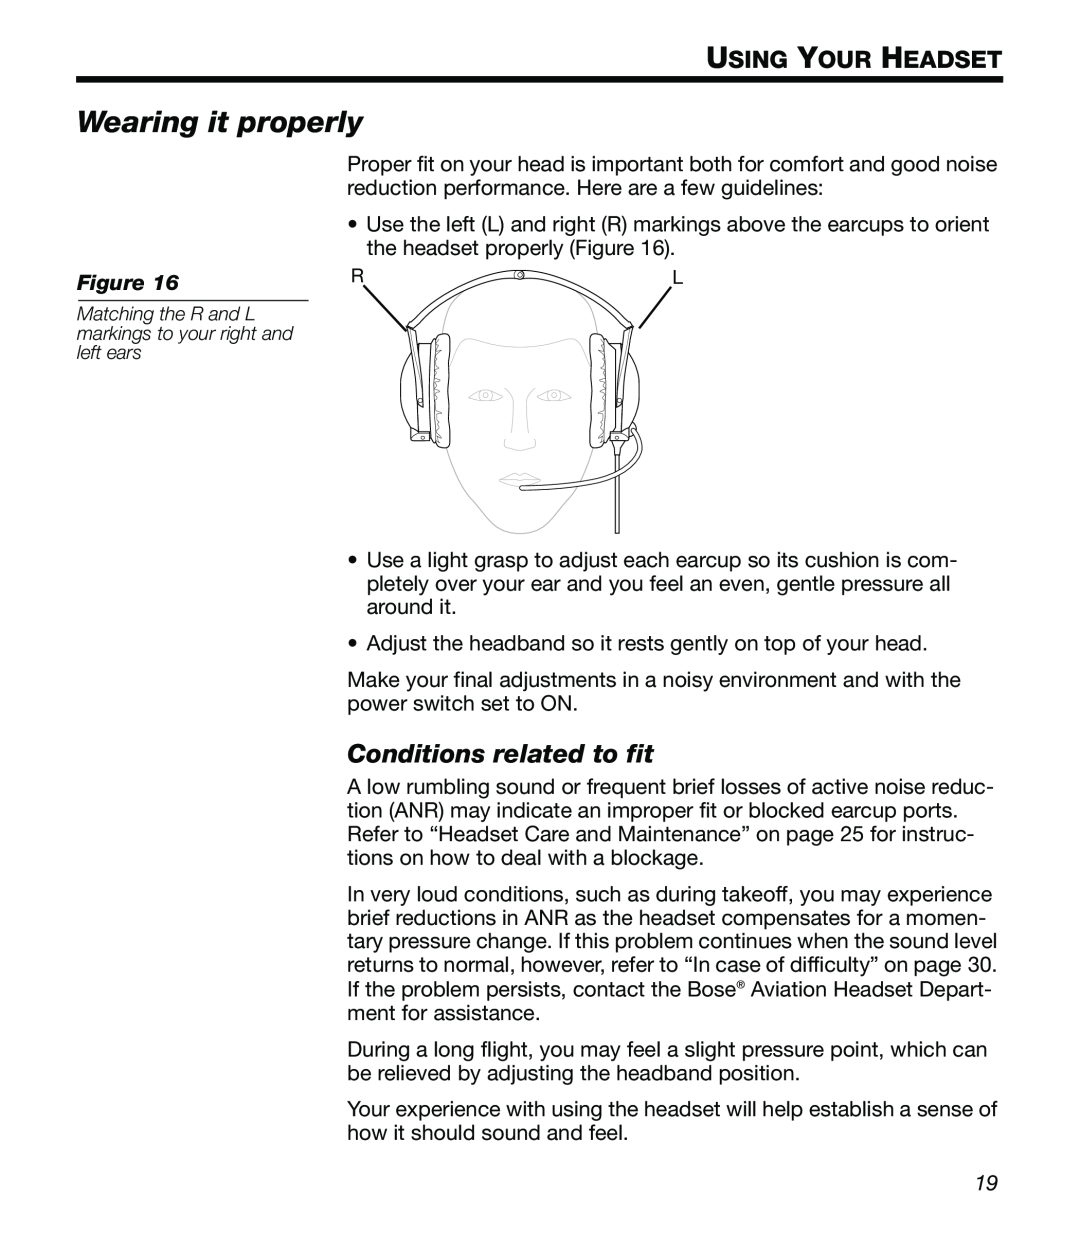 Bose X manual Wearing it properly, Conditions related to fit, Using Your Headset 